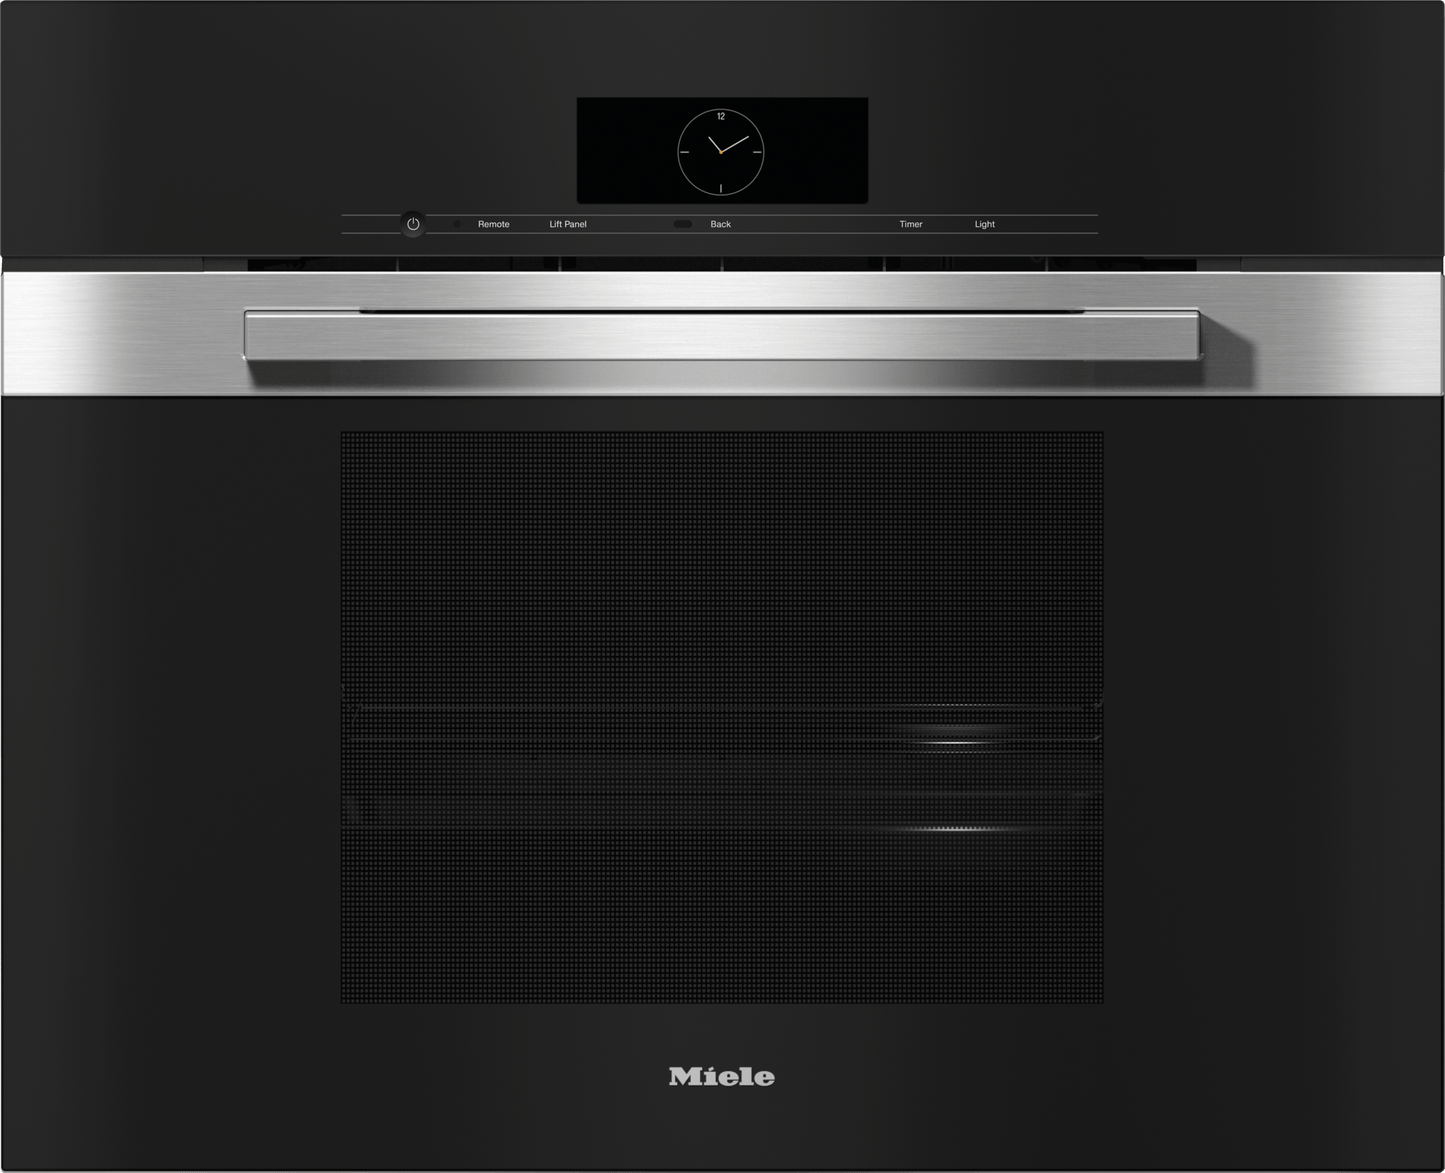 Miele DGC7880 STAINLESS STEEL   30" Combi-Steam Oven Xxl For Steam Cooking, Baking, Roasting With Roast Probe + Menu Cooking.